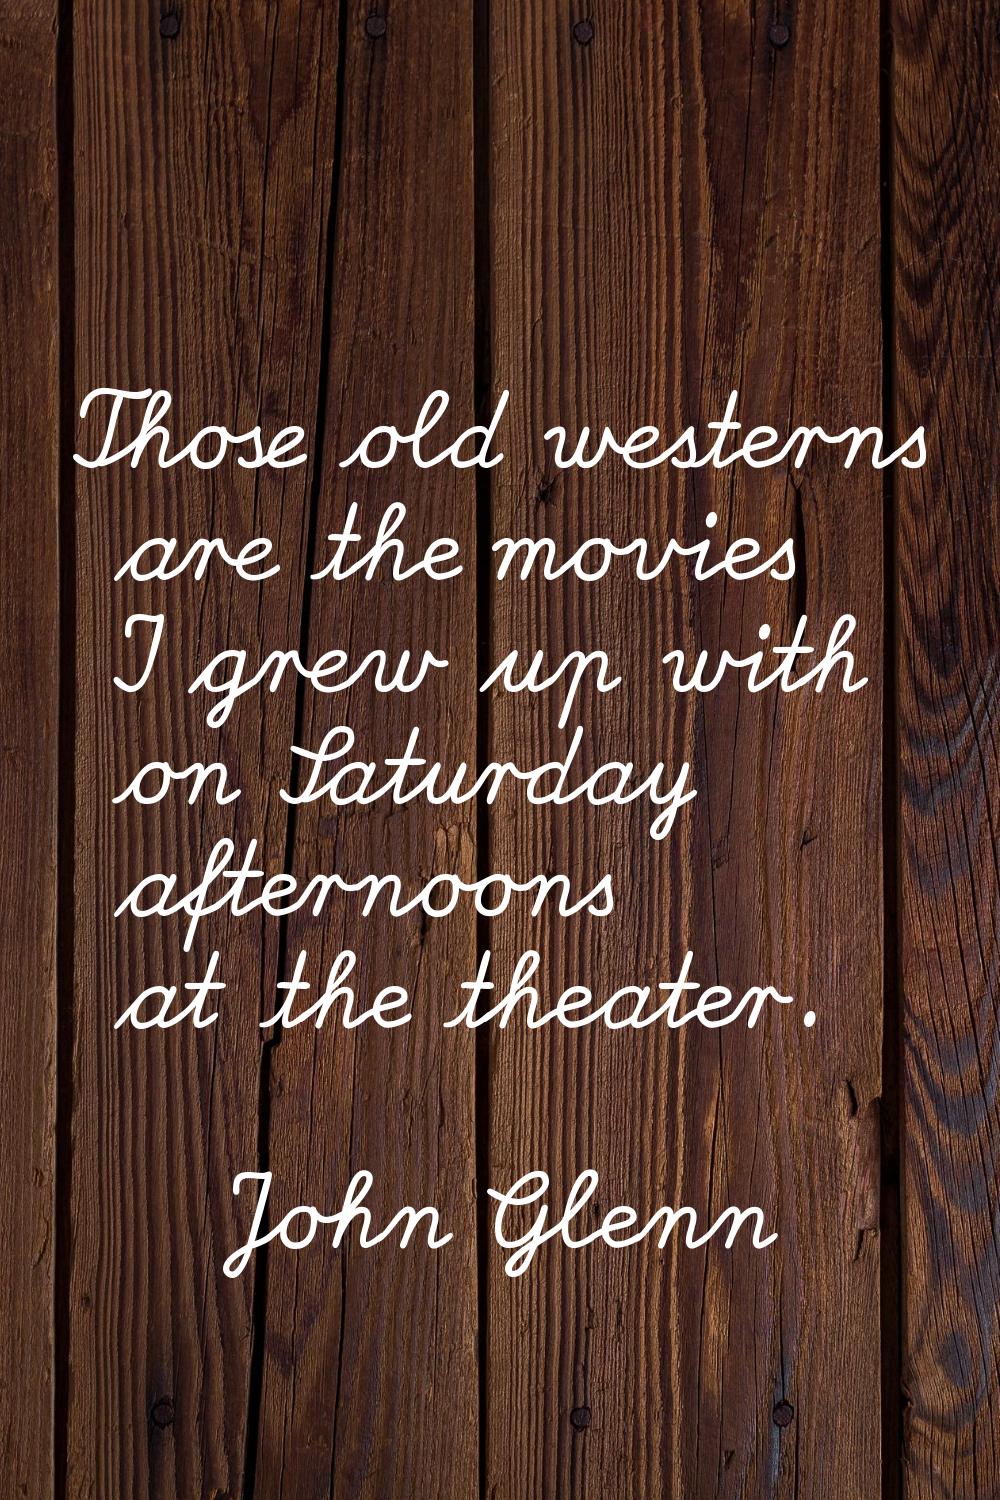 Those old westerns are the movies I grew up with on Saturday afternoons at the theater.